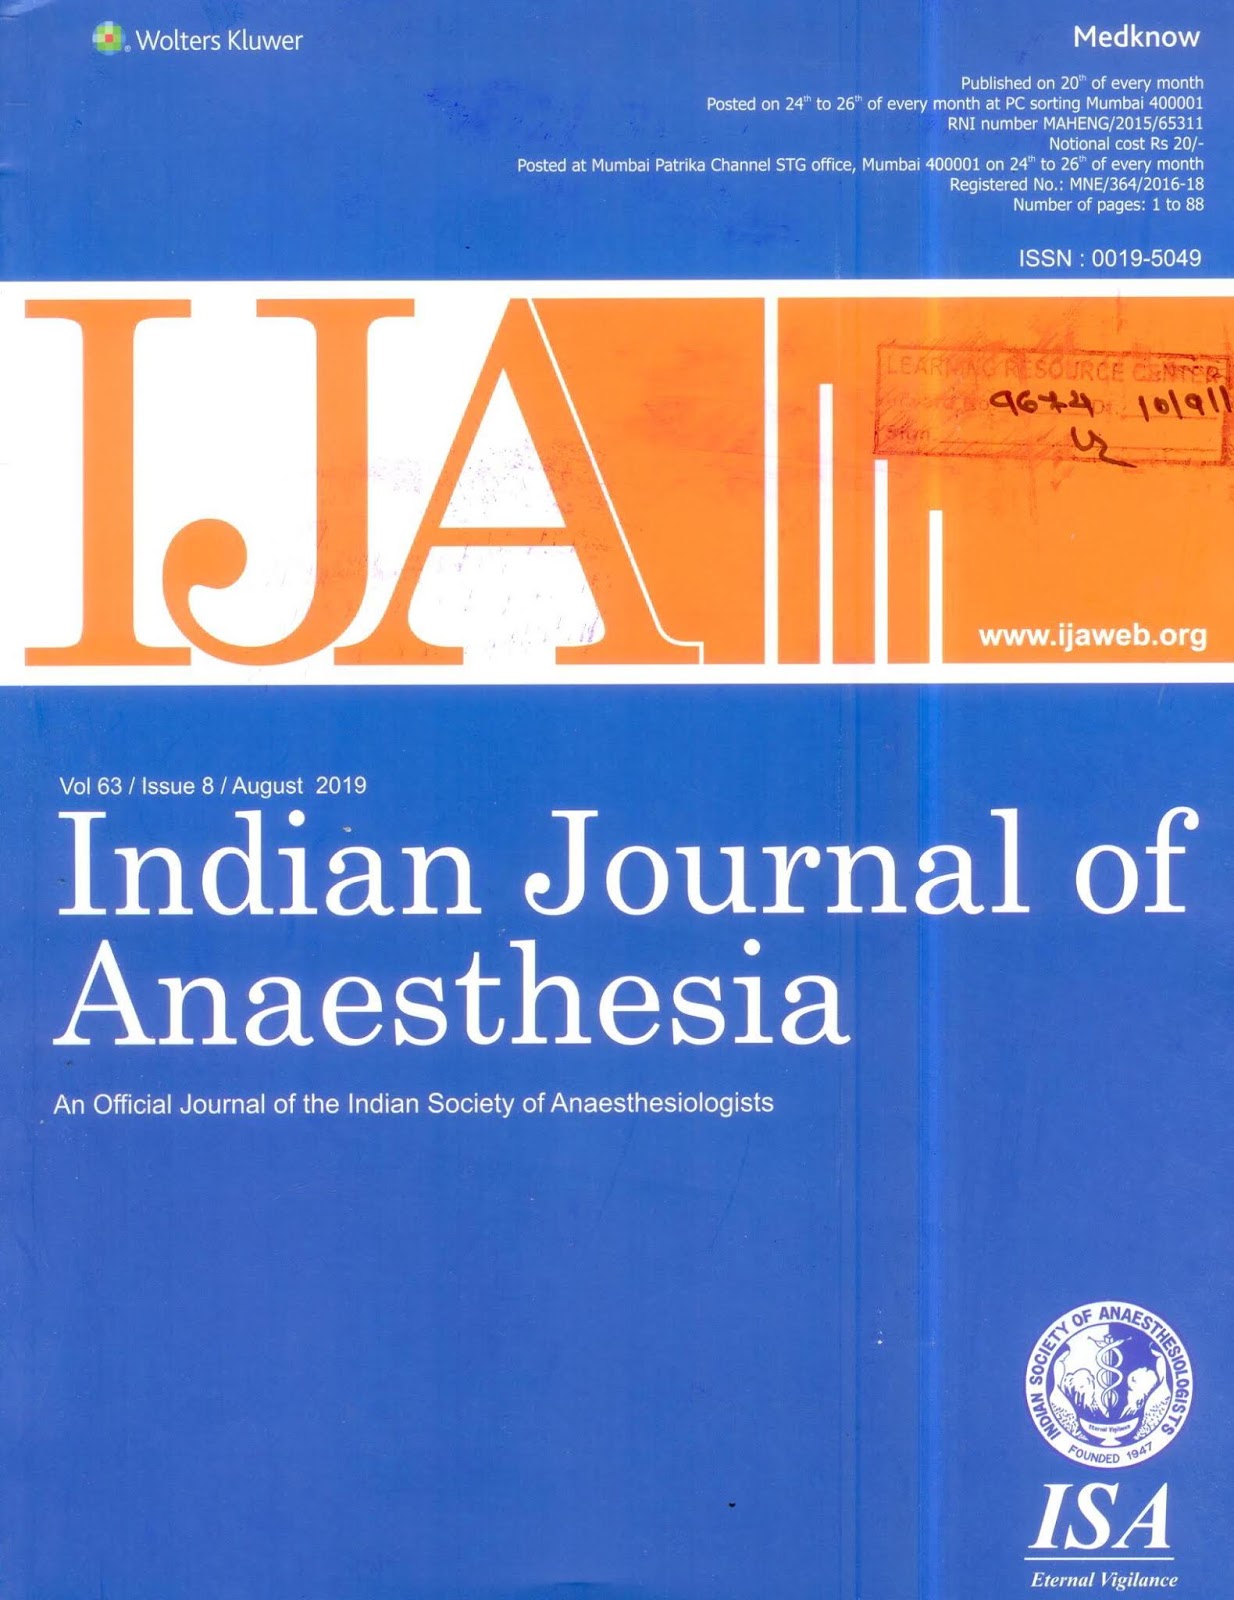 http://www.ijaweb.org/showBackIssue.asp?issn=0019-5049;year=2019;volume=63;issue=8;month=August